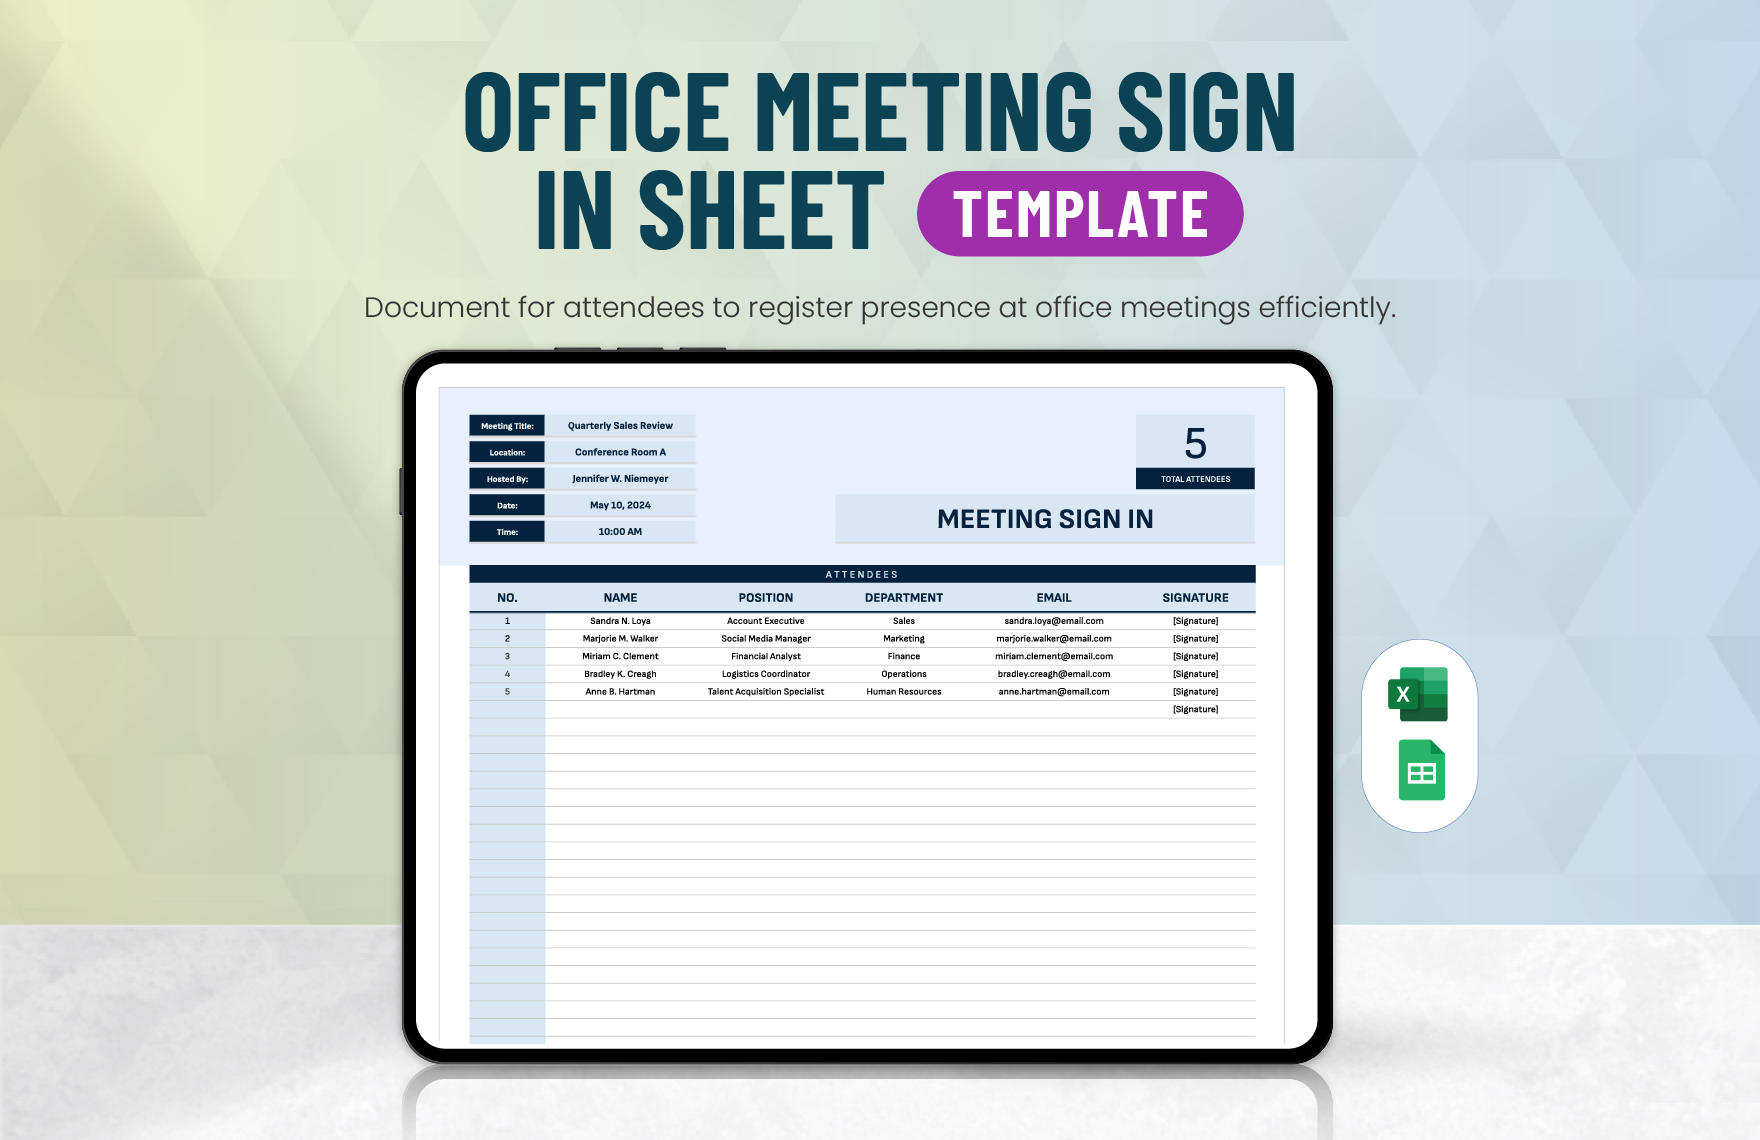 Office Meeting Sign in Sheet Template in Excel, Google Sheets